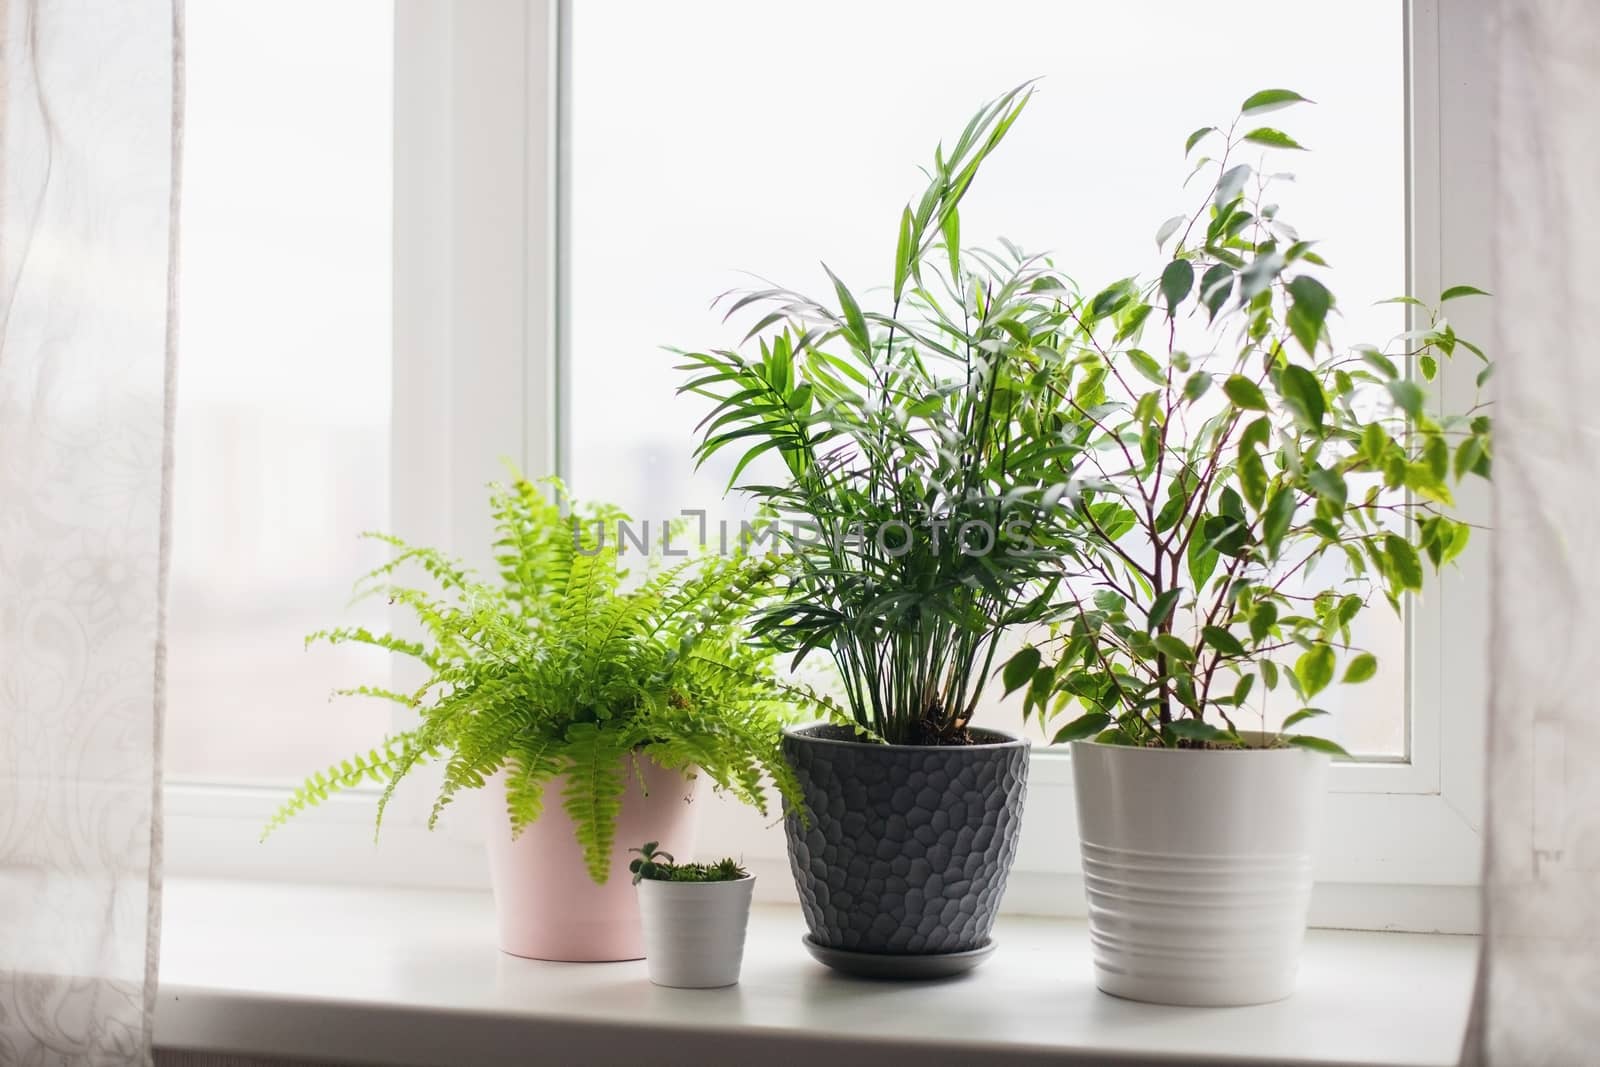 Fern nephrolepsis, ficus, succulents and palm Hamedorea. Home green flowers and plants in pink, white and gray pots on the windowsill. scandinavian care concept Interior